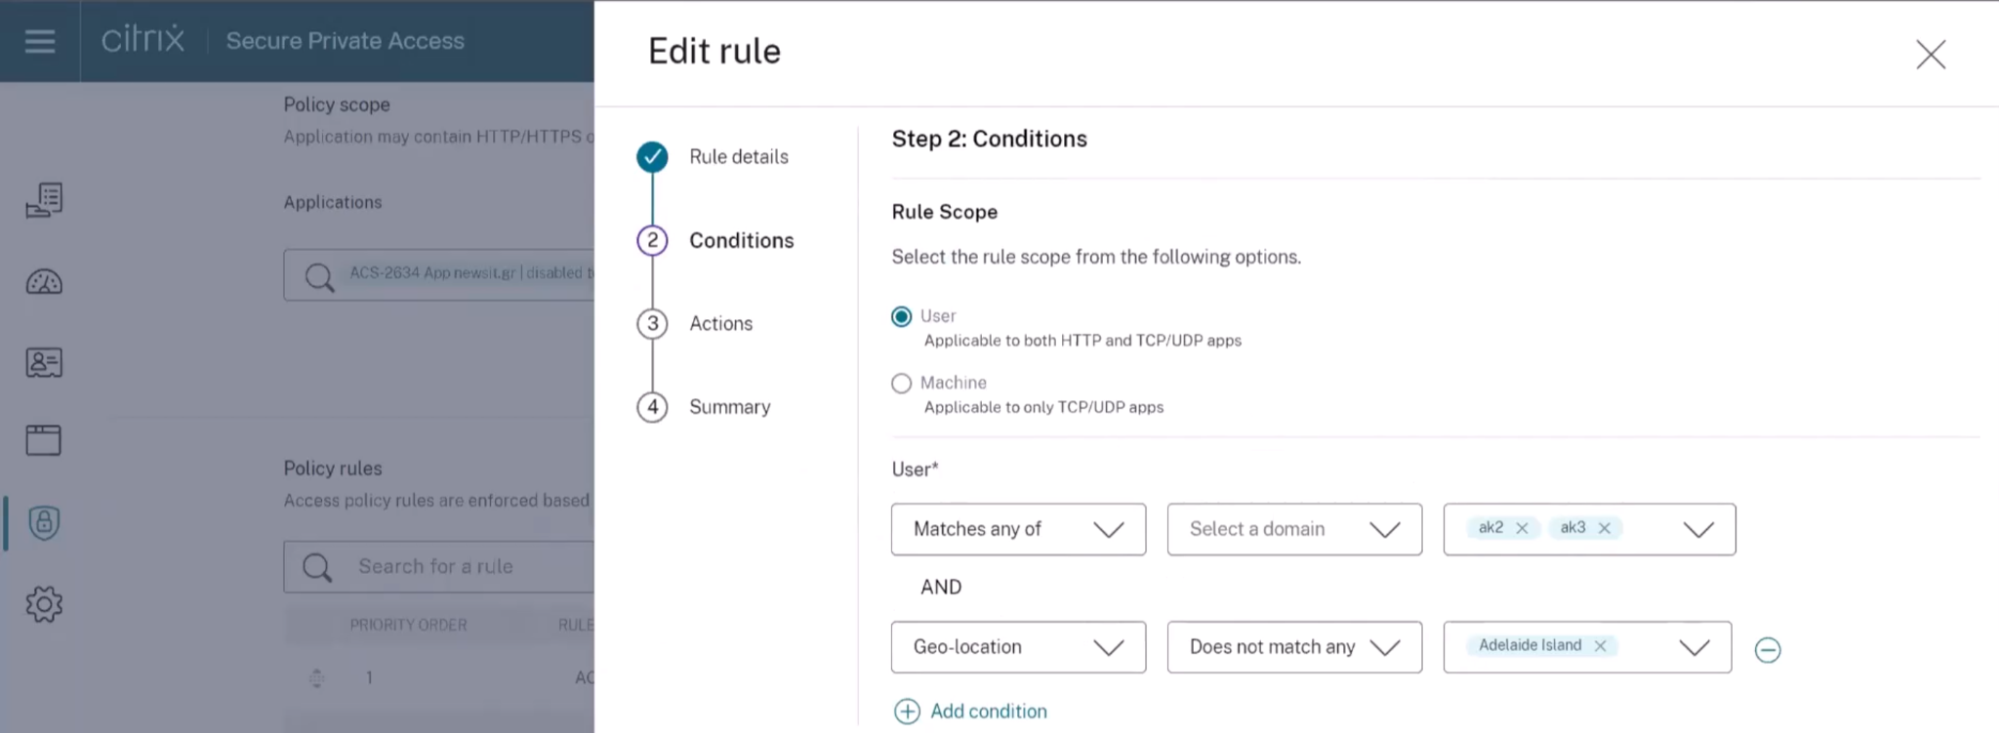 The new Citrix Secure Private Access Service APIs help to automate application and access policy configuration and include it in their existing tasks. For example, changing the Geo-location of an Access Policy Rule, is made incredibly simple.